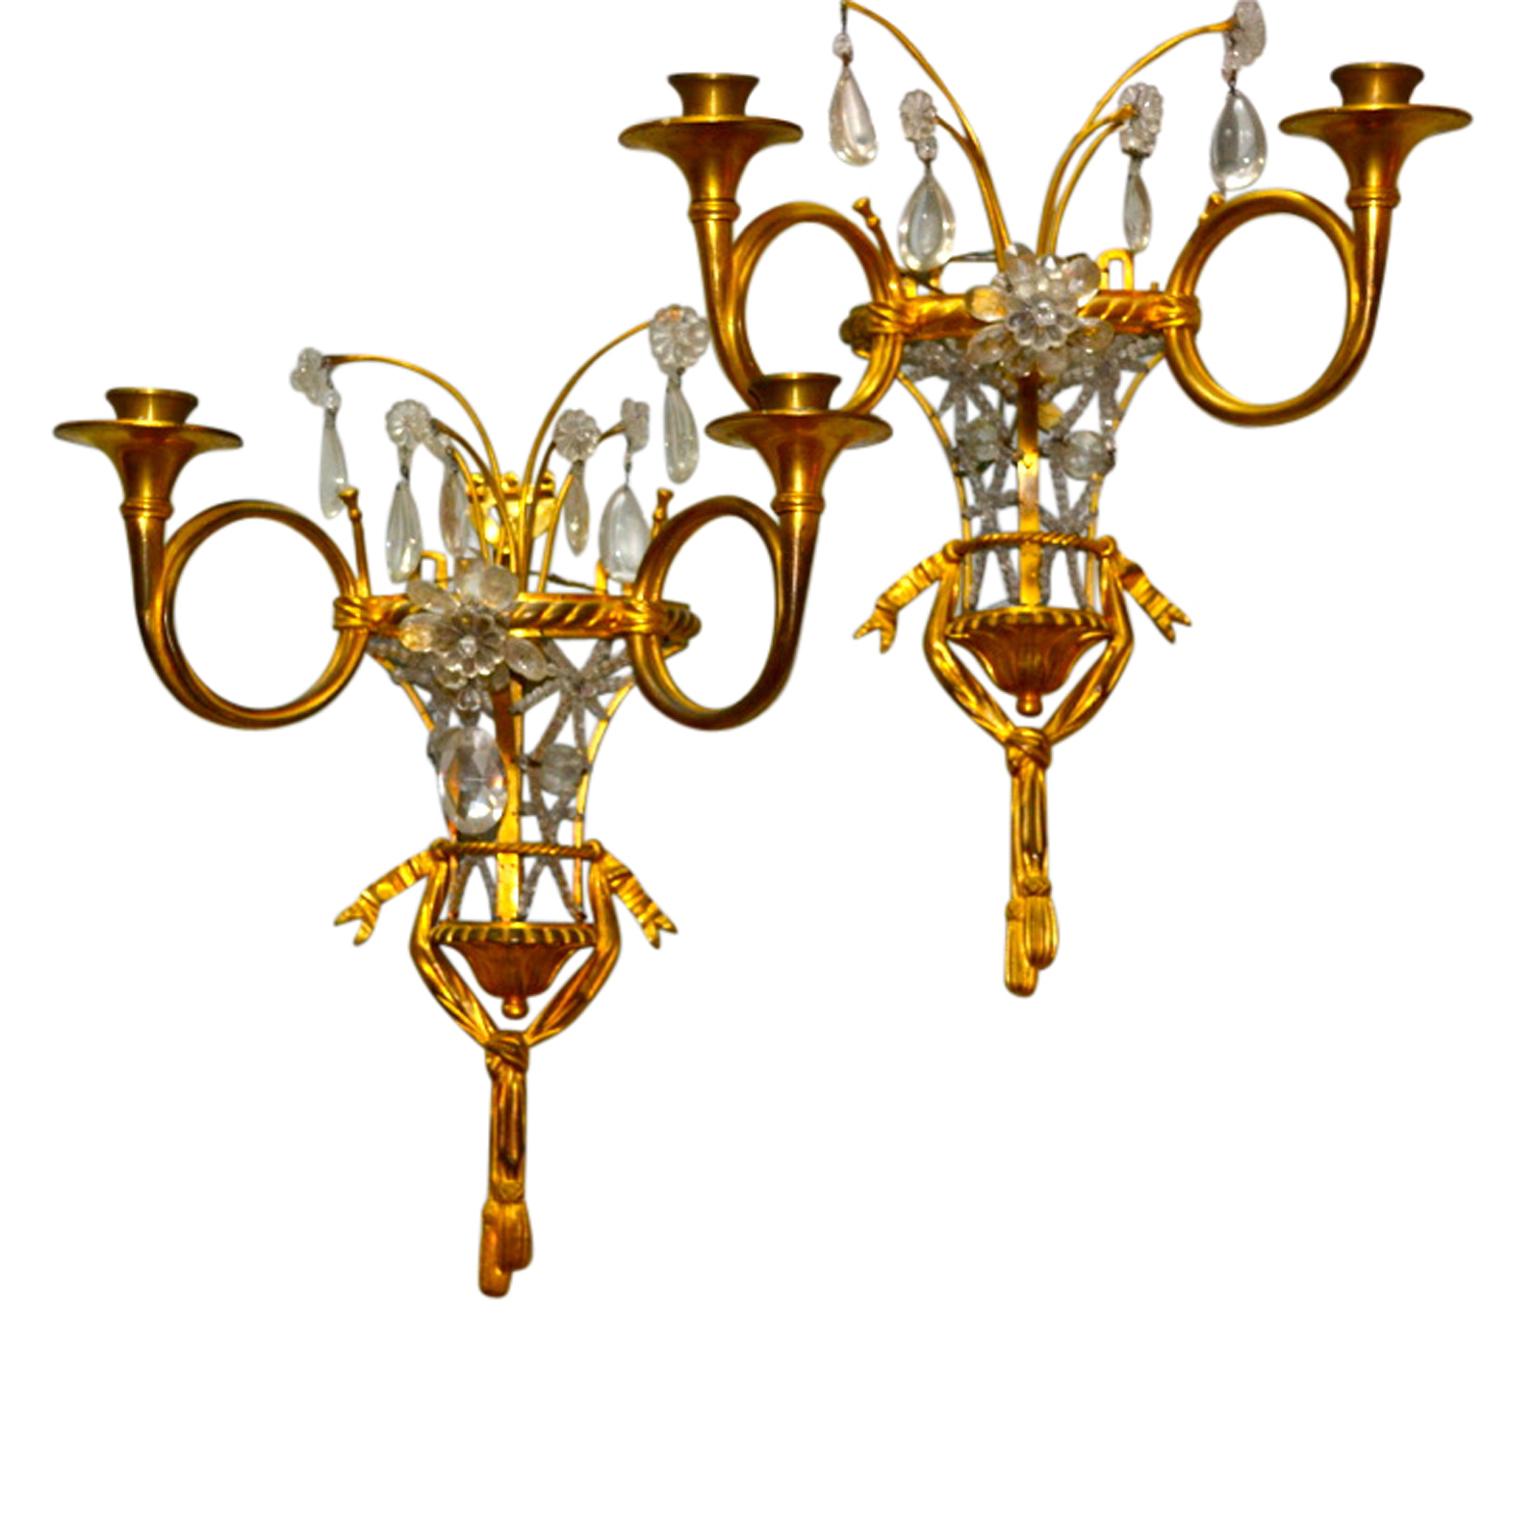 A pair of unusual shaped gilt metal and crystal wall sconces. The half urn shaped body is open and is criss crossed with beaded crystals; the bottom of the 'vase' has gilt bronze decoration in the form of swags and ribbons. From the top of the vase